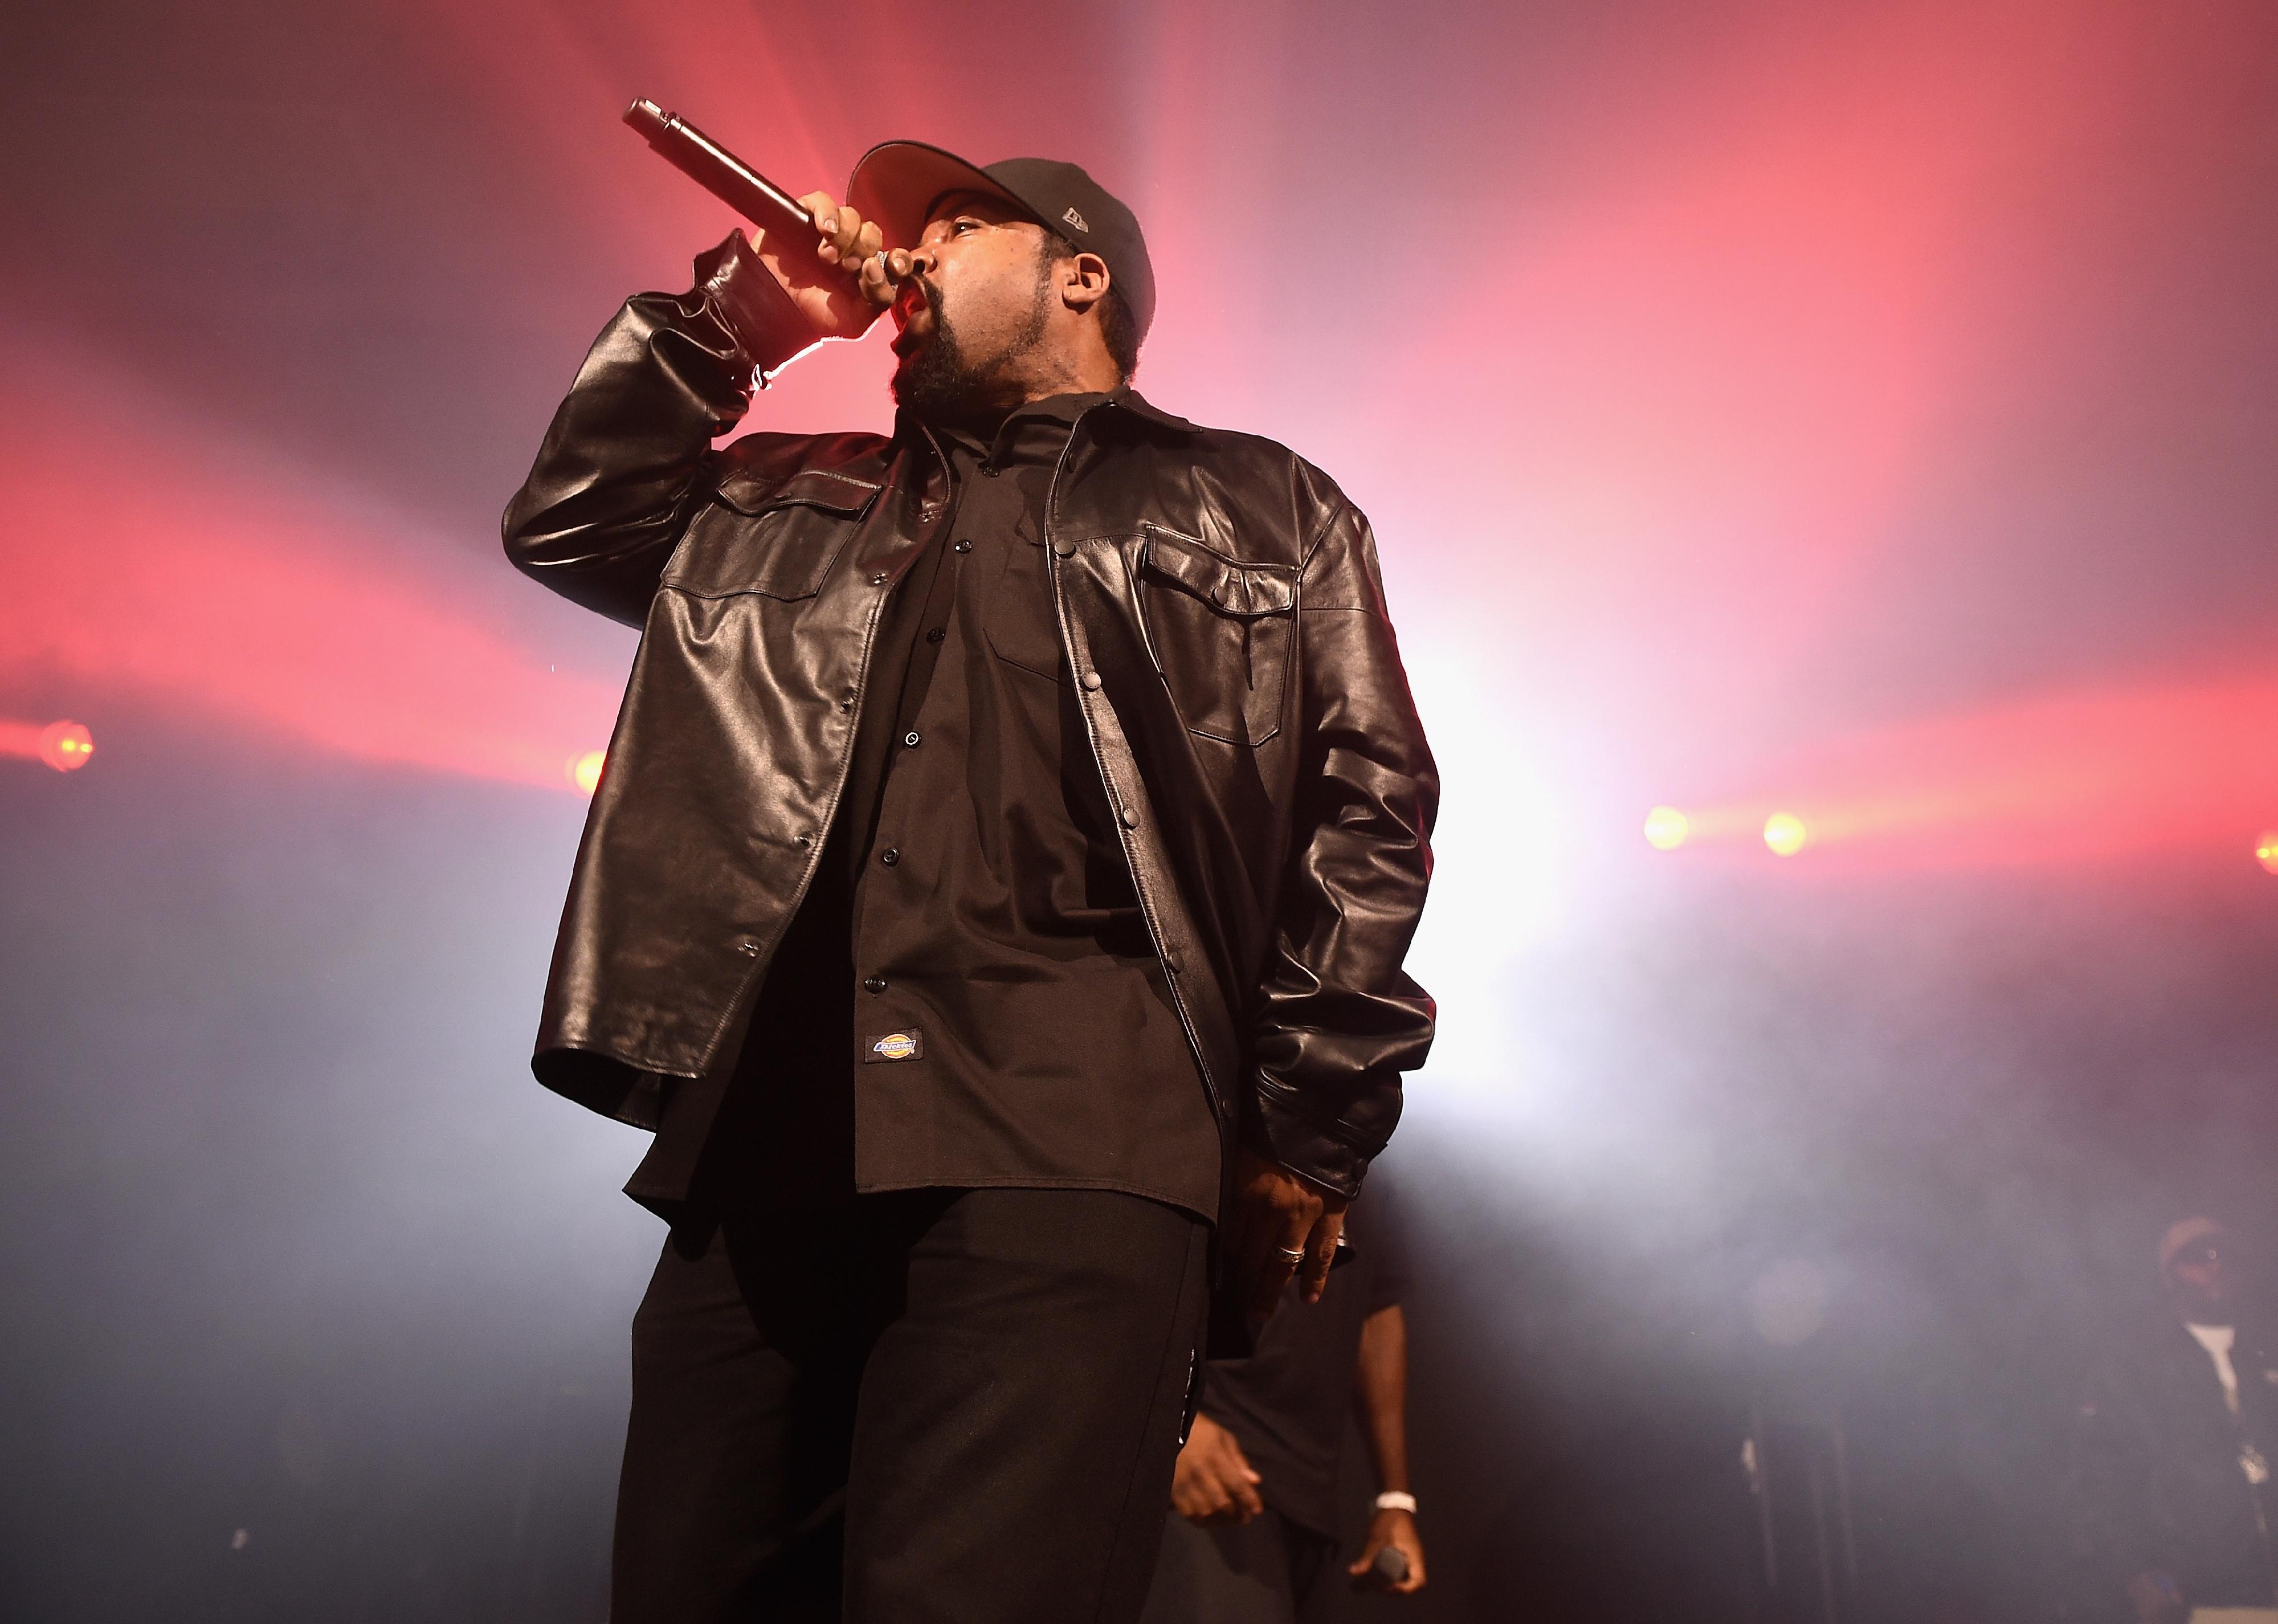 Ice Cube onstage in all black.